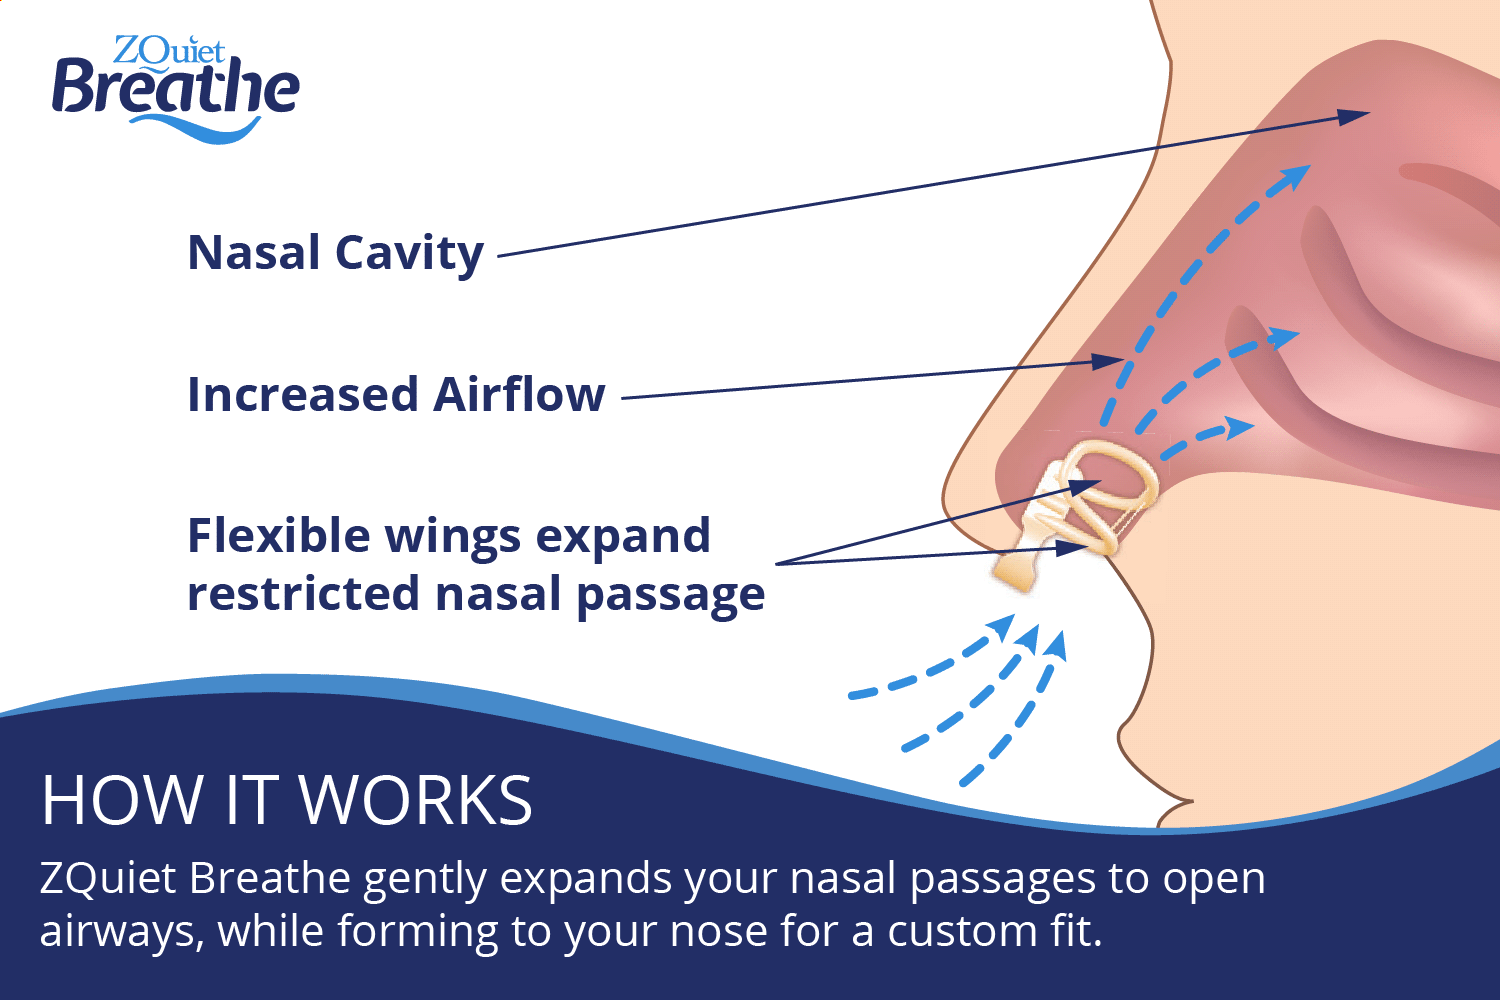 illustration showing how ZQuiet breathe works to expand nasal passages to increase airflow